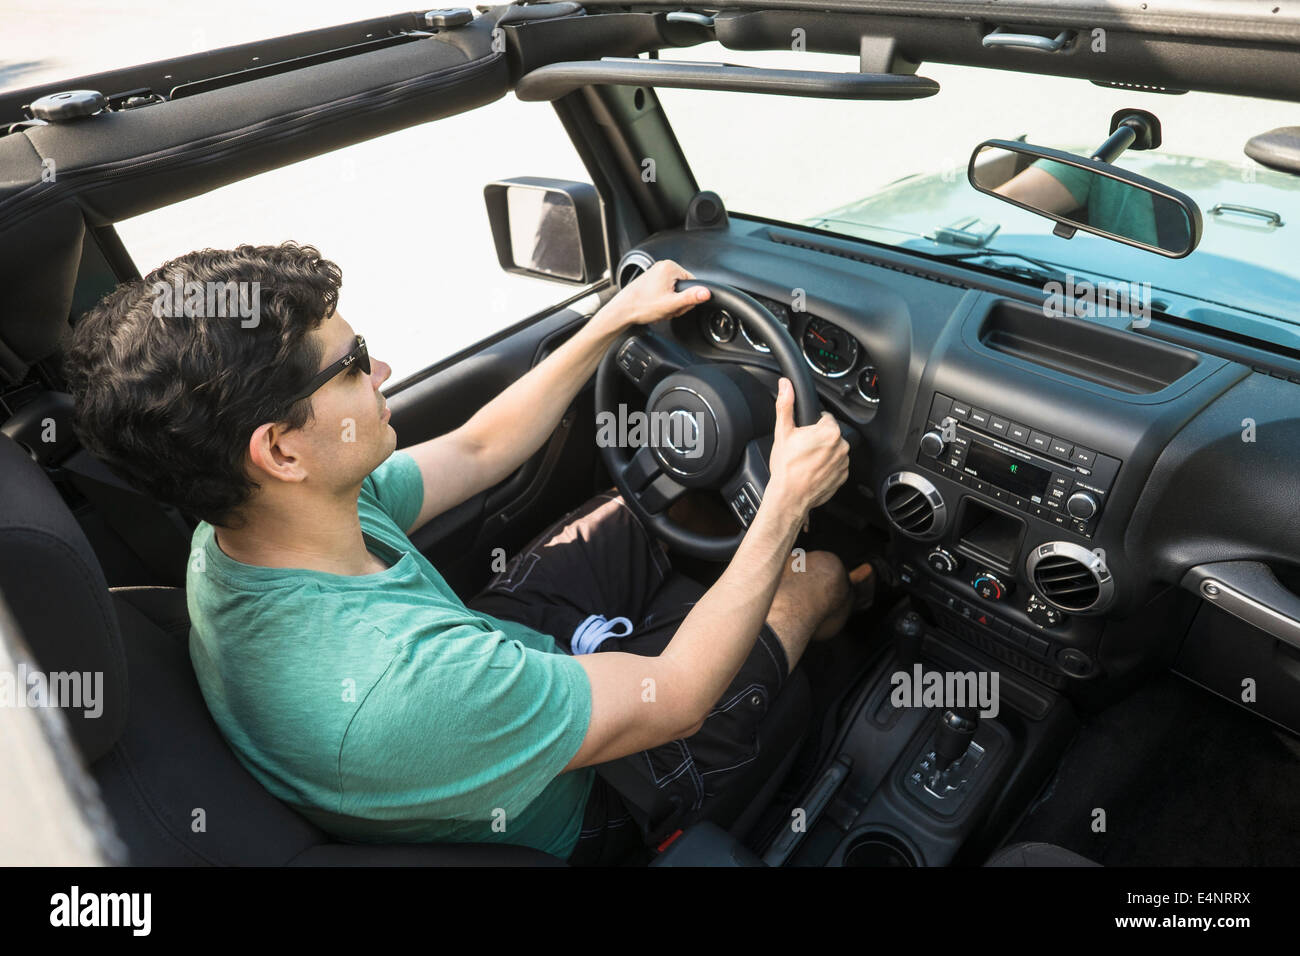 Elevated view of man driving car Stock Photo